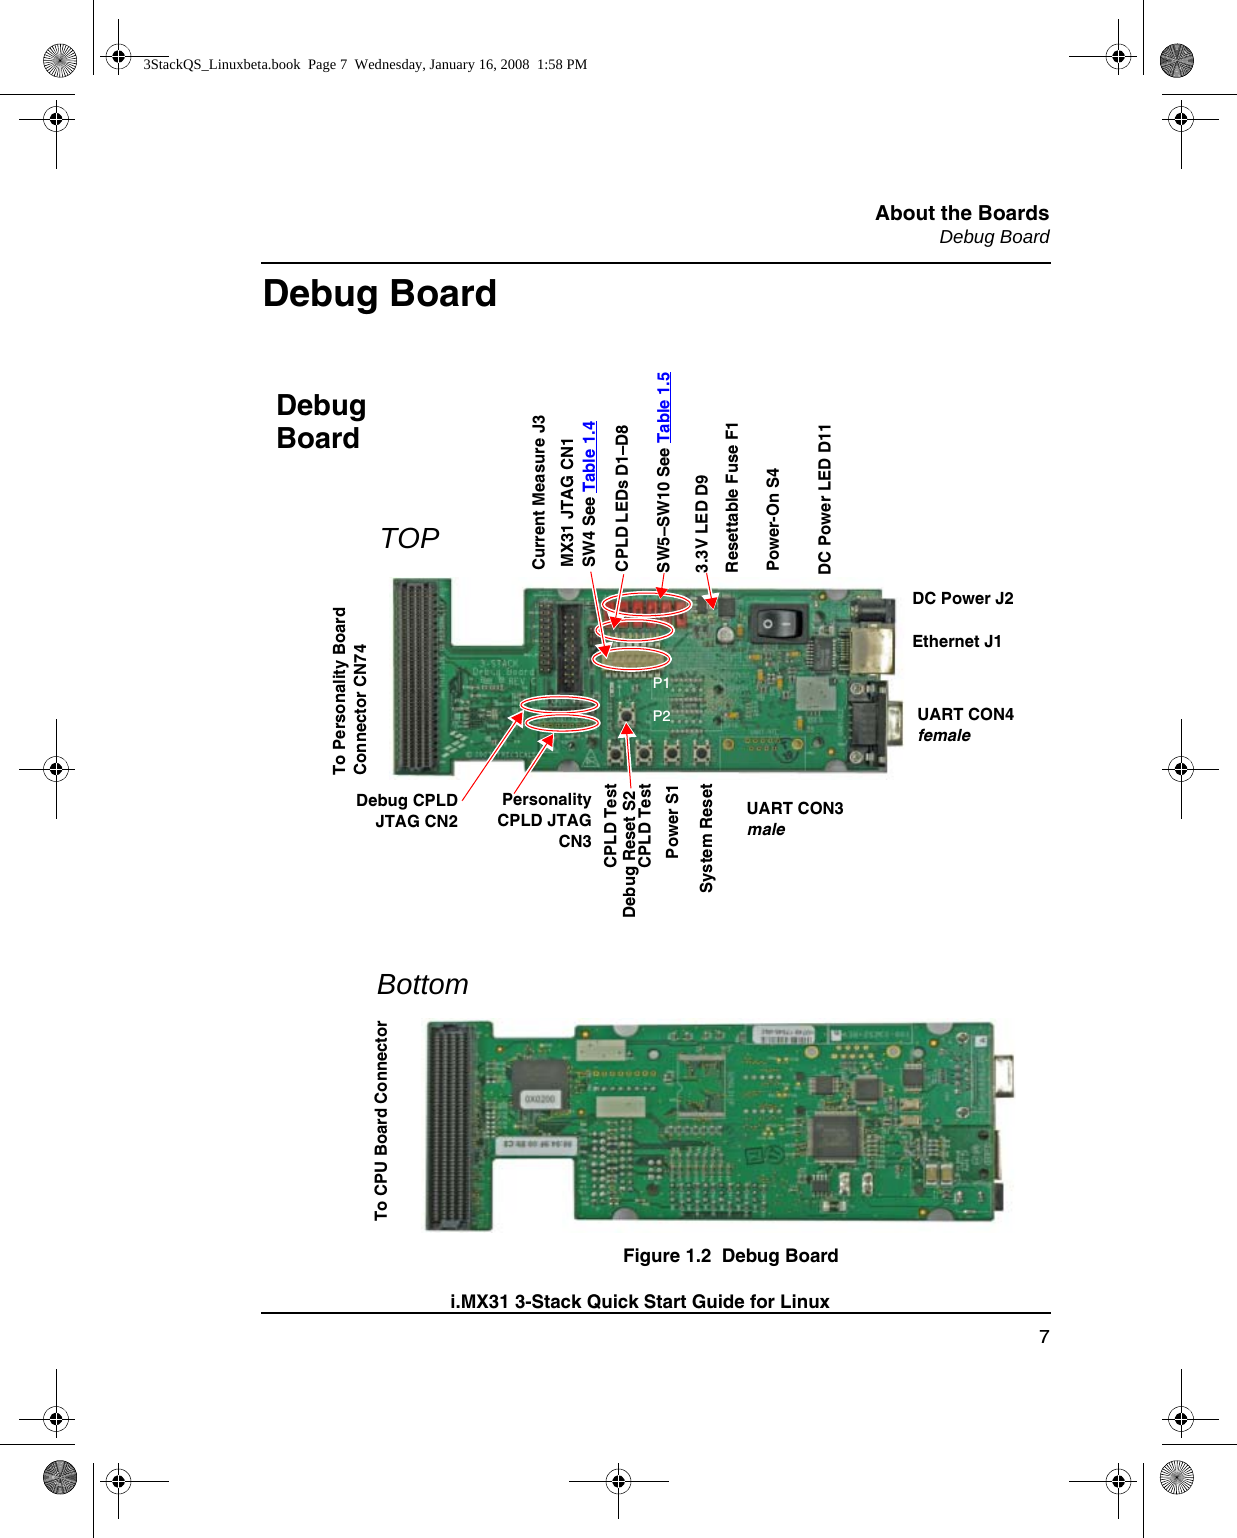 About the BoardsDebug Board7i.MX31 3-Stack Quick Start Guide for LinuxDebug BoardFigure 1.2  Debug BoardTo Personality Board Connector CN74Current Measure J3MX31 JTAG CN1SW5–SW10 See Table 1.53.3V LED D9Power-On S4DC Power LED D11DC Power J2Ethernet J1UART CON4 femaleUART CON3 maleDebug CPLDJTAG CN2PersonalityCPLD JTAGCN3CPLD TestDebug Reset S2CPLD TestPower S1System ResetCPLD LEDs D1–D8SW4 See Table 1.4Debug Board TOPBottomP1P2Resettable Fuse F1To CPU Board Connector3StackQS_Linuxbeta.book  Page 7  Wednesday, January 16, 2008  1:58 PM